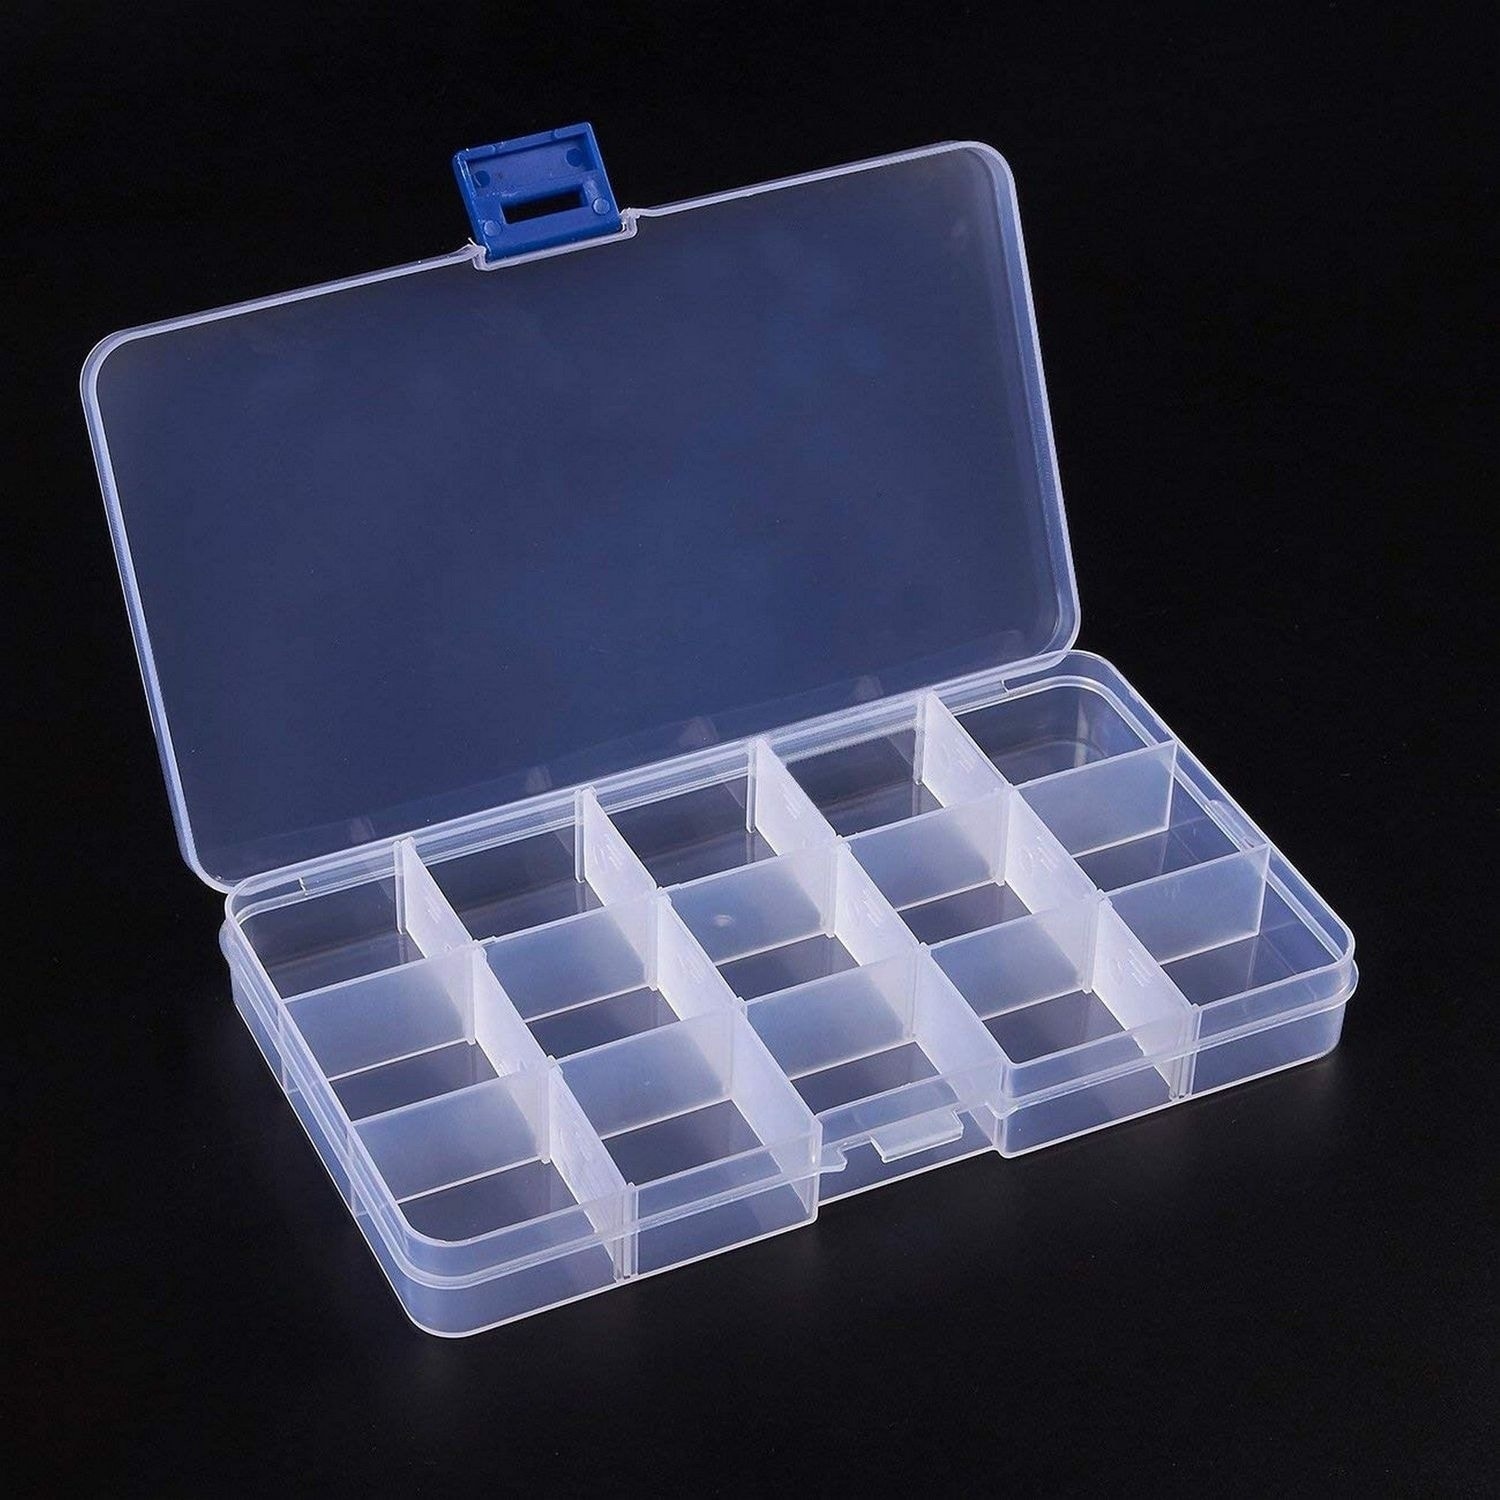 https://ak1.ostkcdn.com/images/products/30363678/Clear-Jewelry-Box-6-Pack-Plastic-Bead-Storage-Container-Earrings-Organizer-bbefef28-f7a7-4b85-9246-23b1c622f00d.jpg